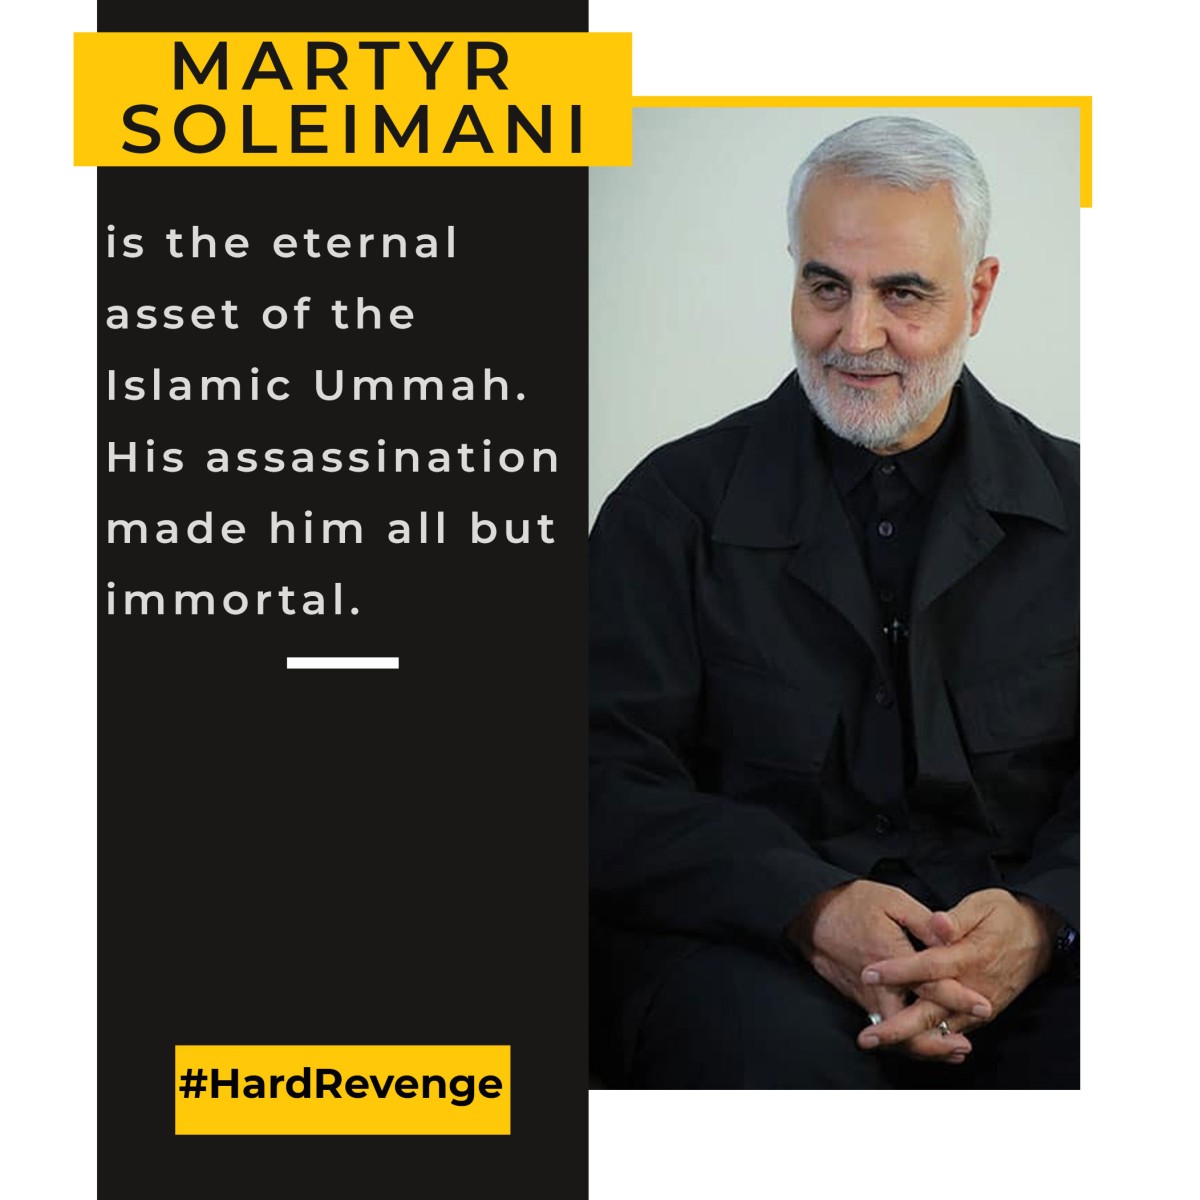  Martyr Soleimani is the eternal asset of the Islamic Ummah.